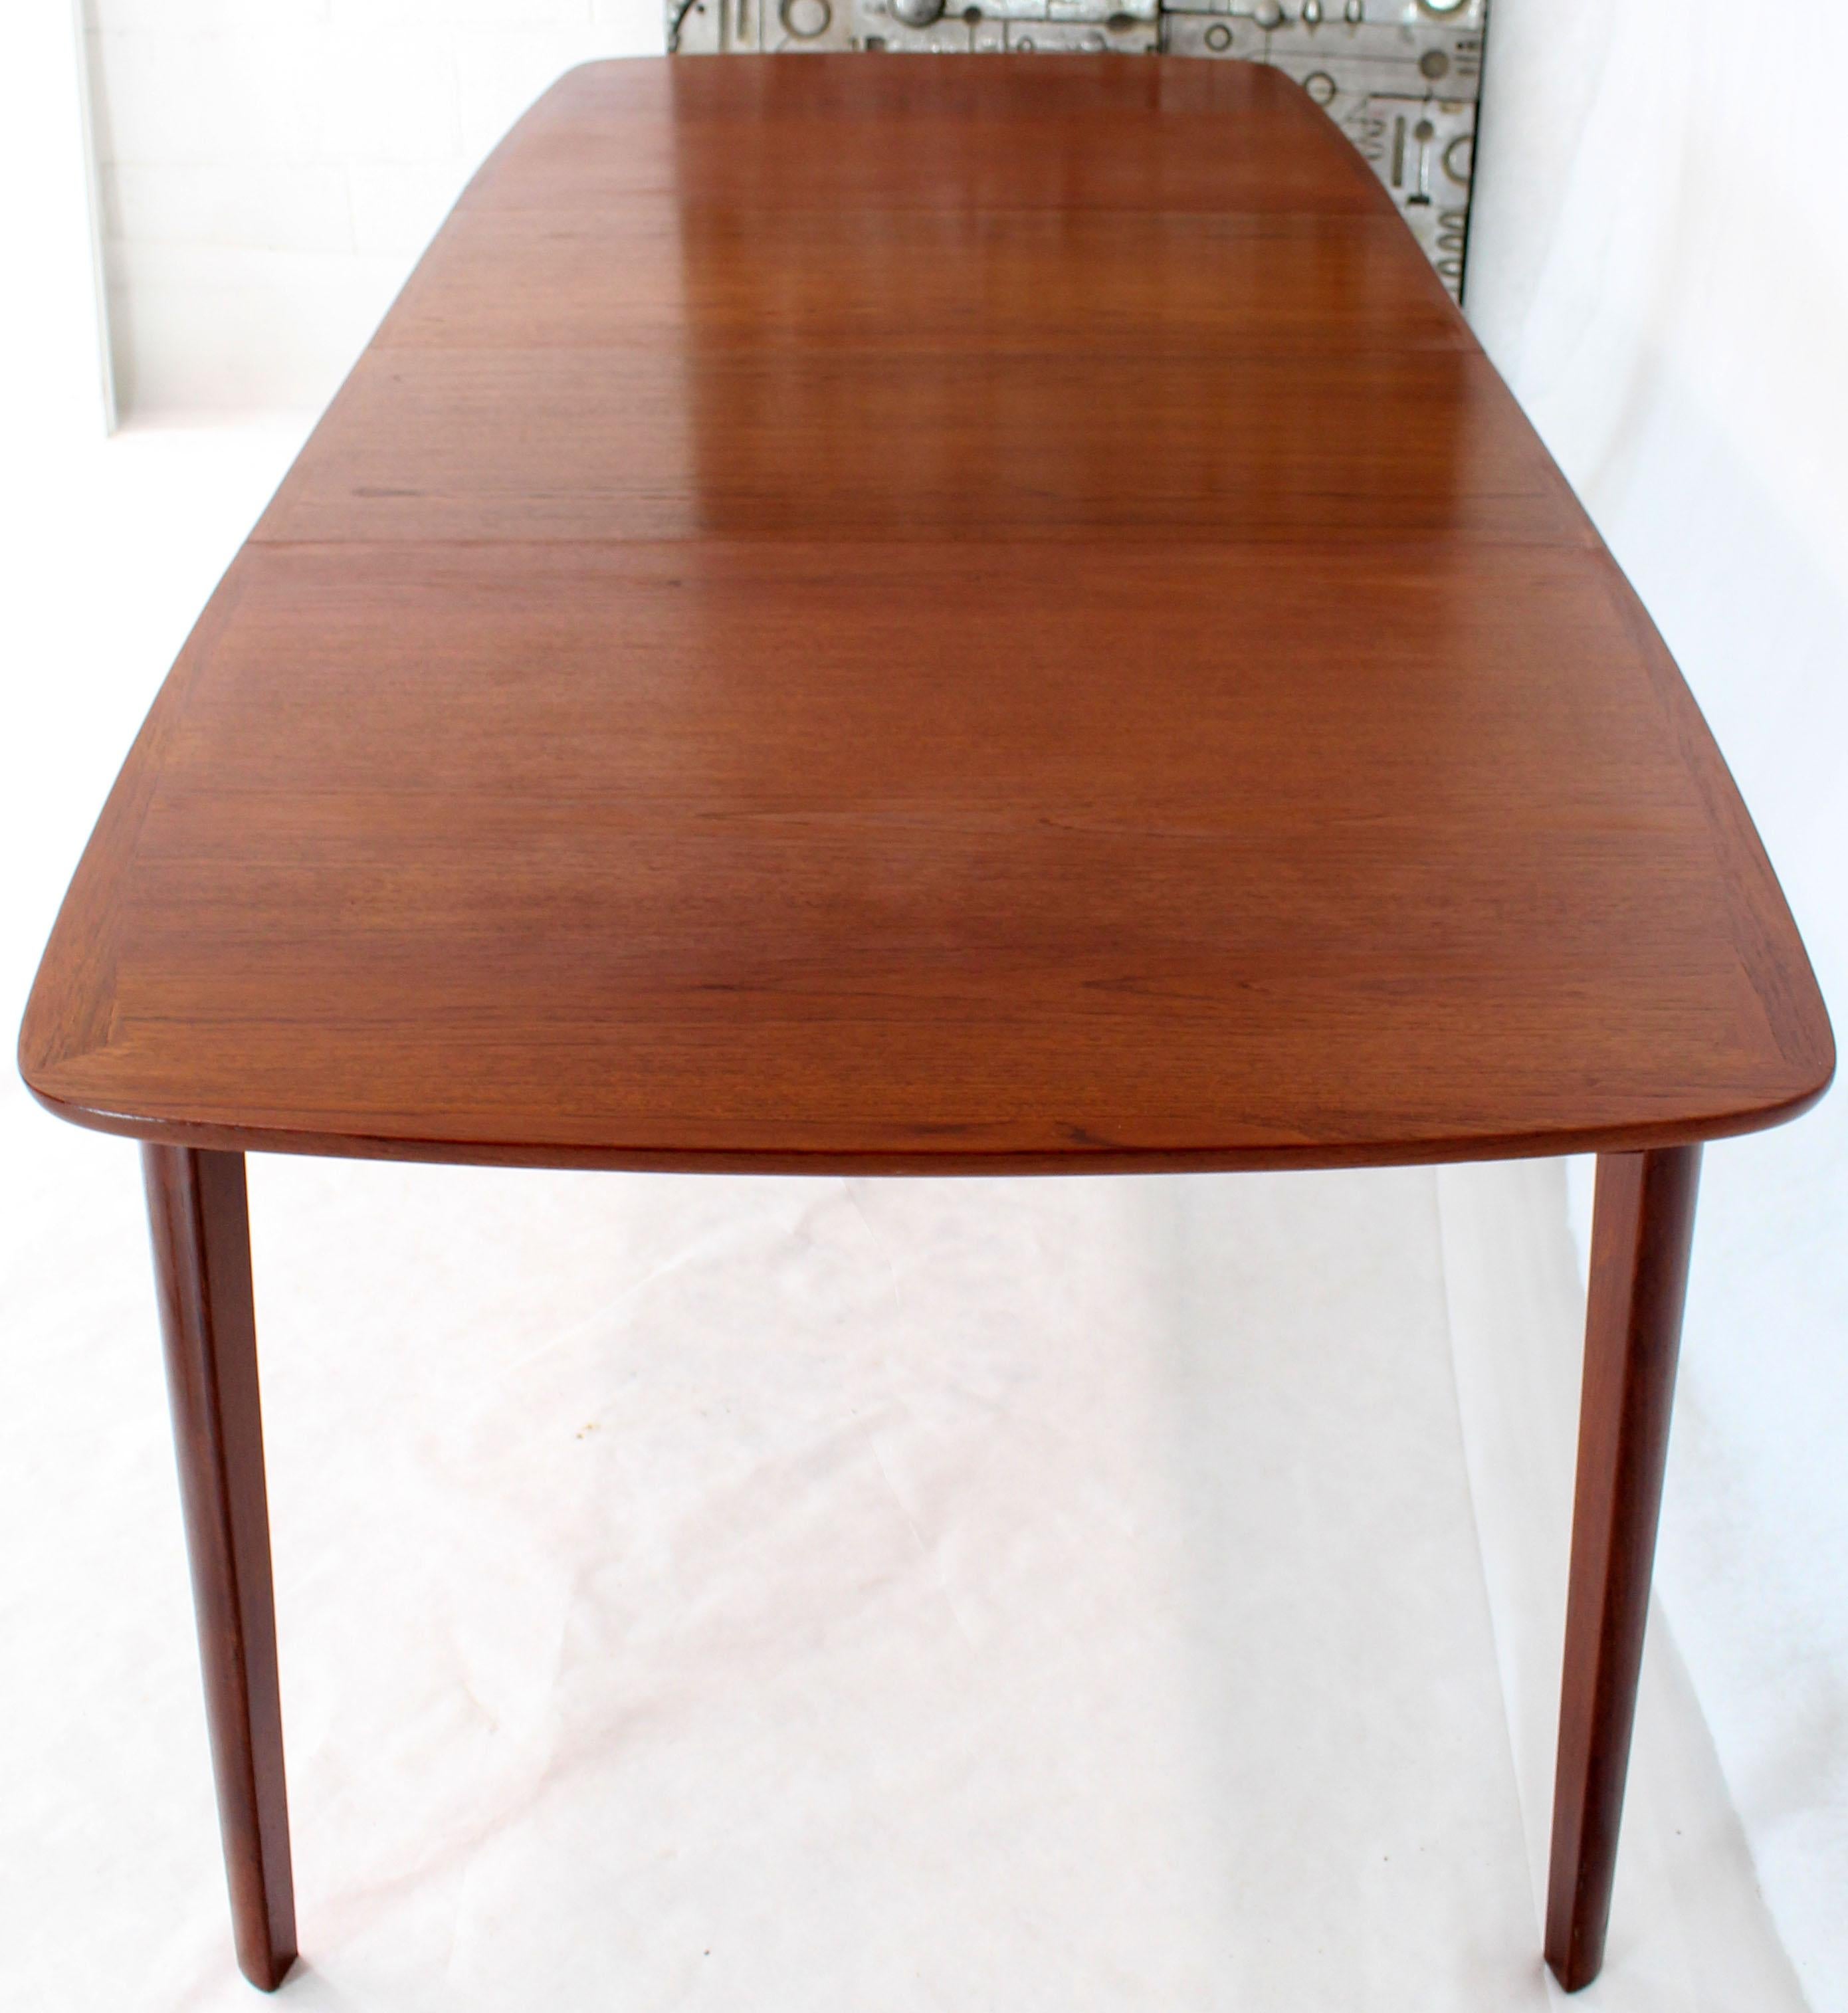 Danish Teak Mid-Century Modern Dining Banquet Table Self Storing Folding Leafs For Sale 4